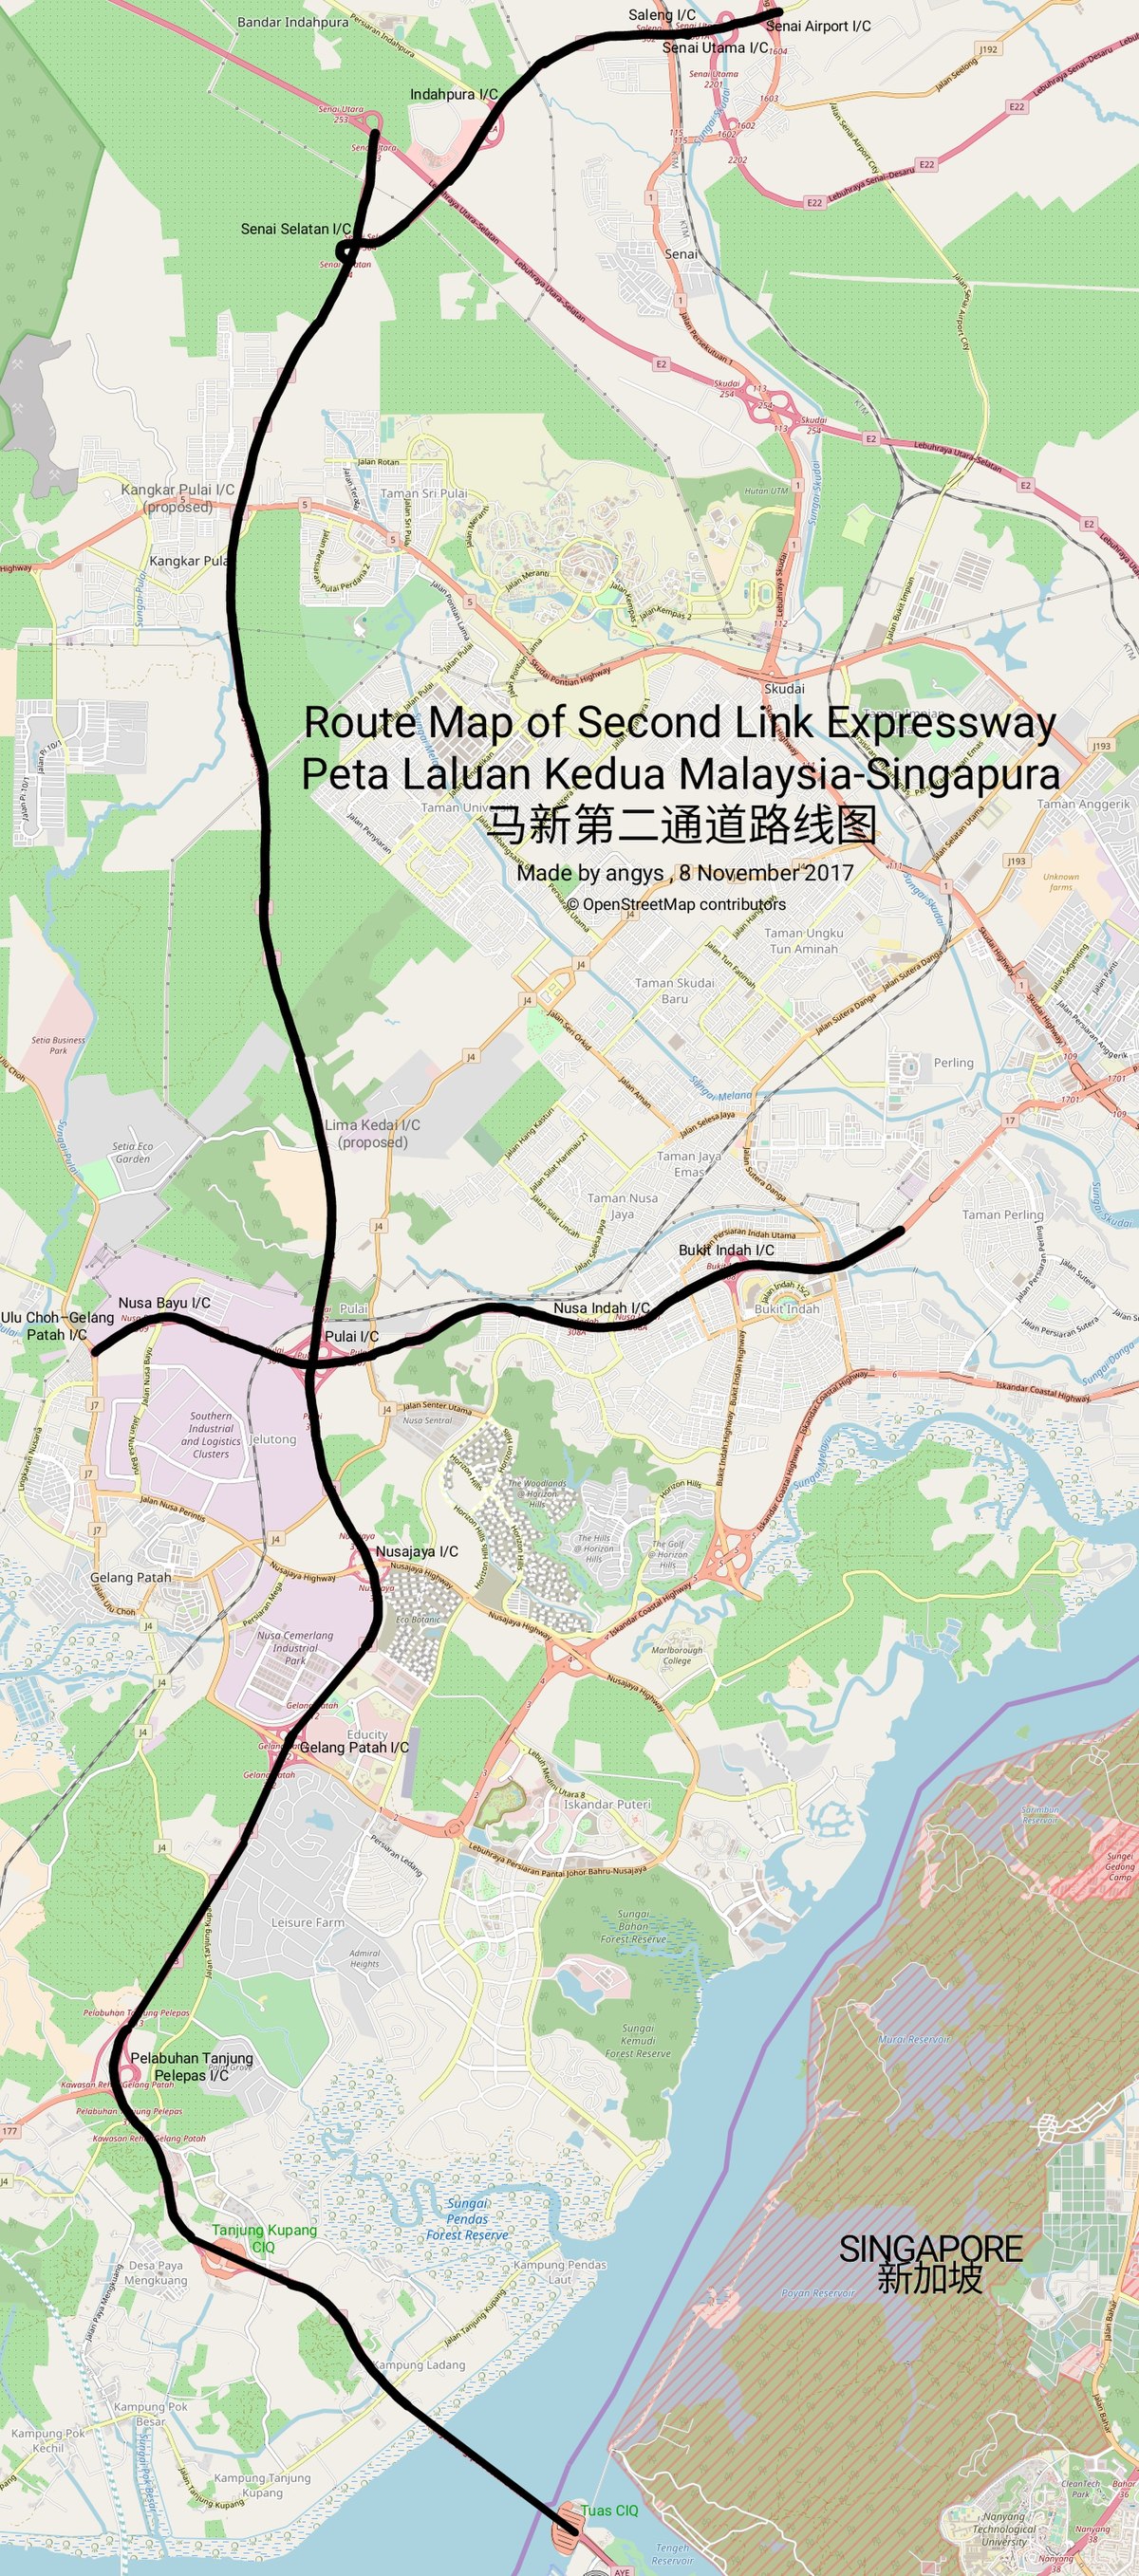 Second Link Expressway - Wikipedia